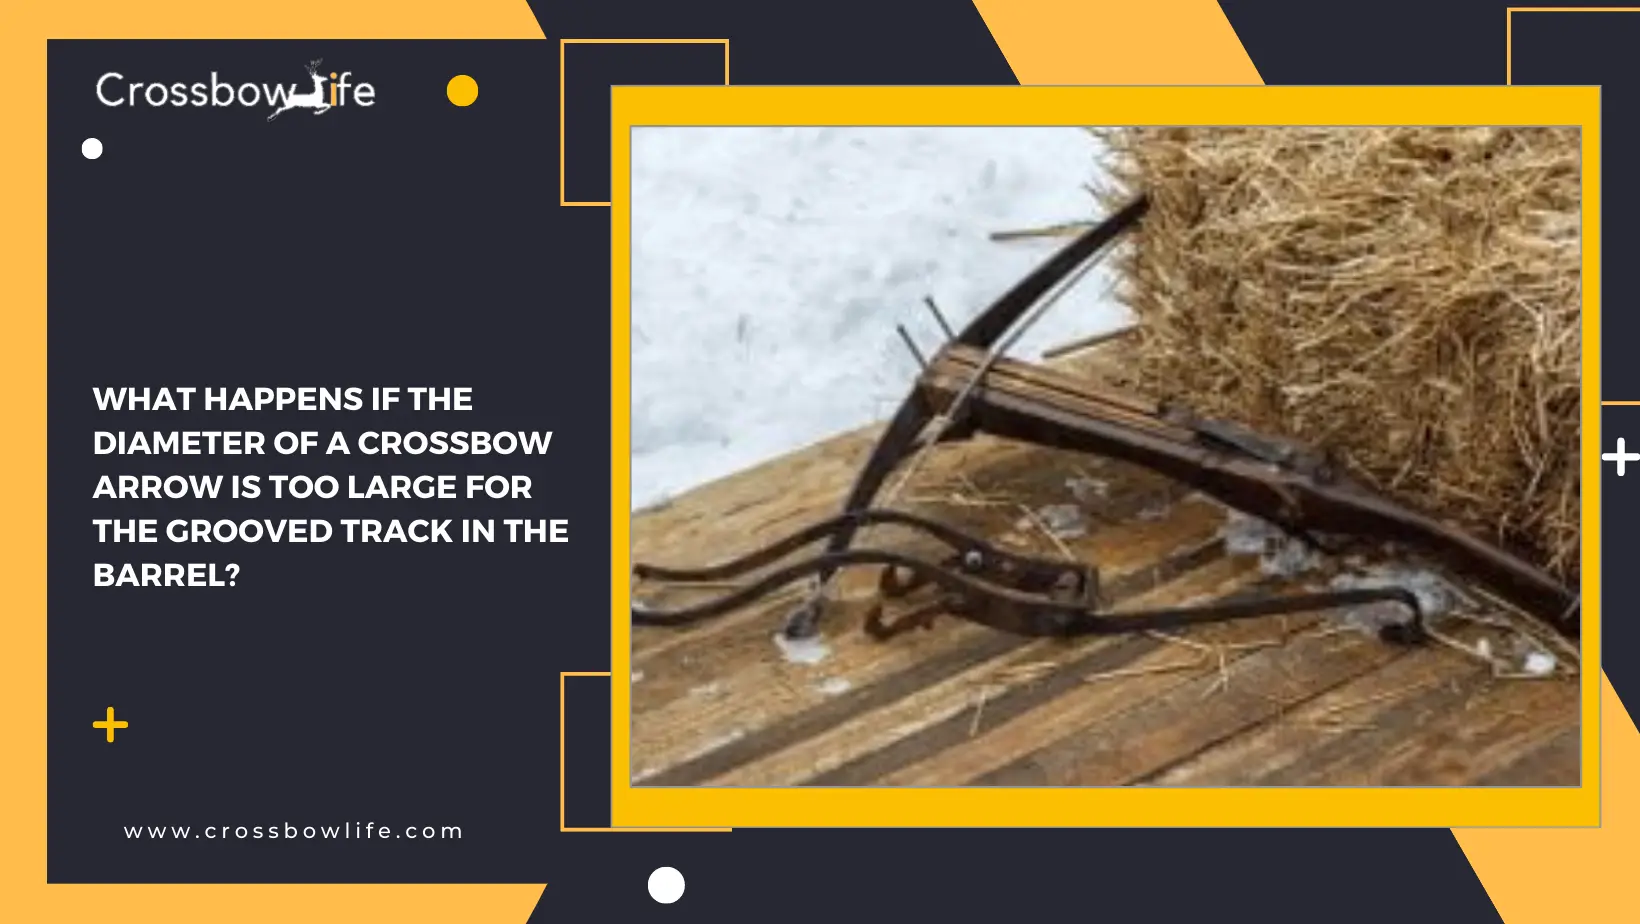 What Happens If The Diameter of a Crossbow Arrow Is Too Large for the Grooved Track in The Barrel?